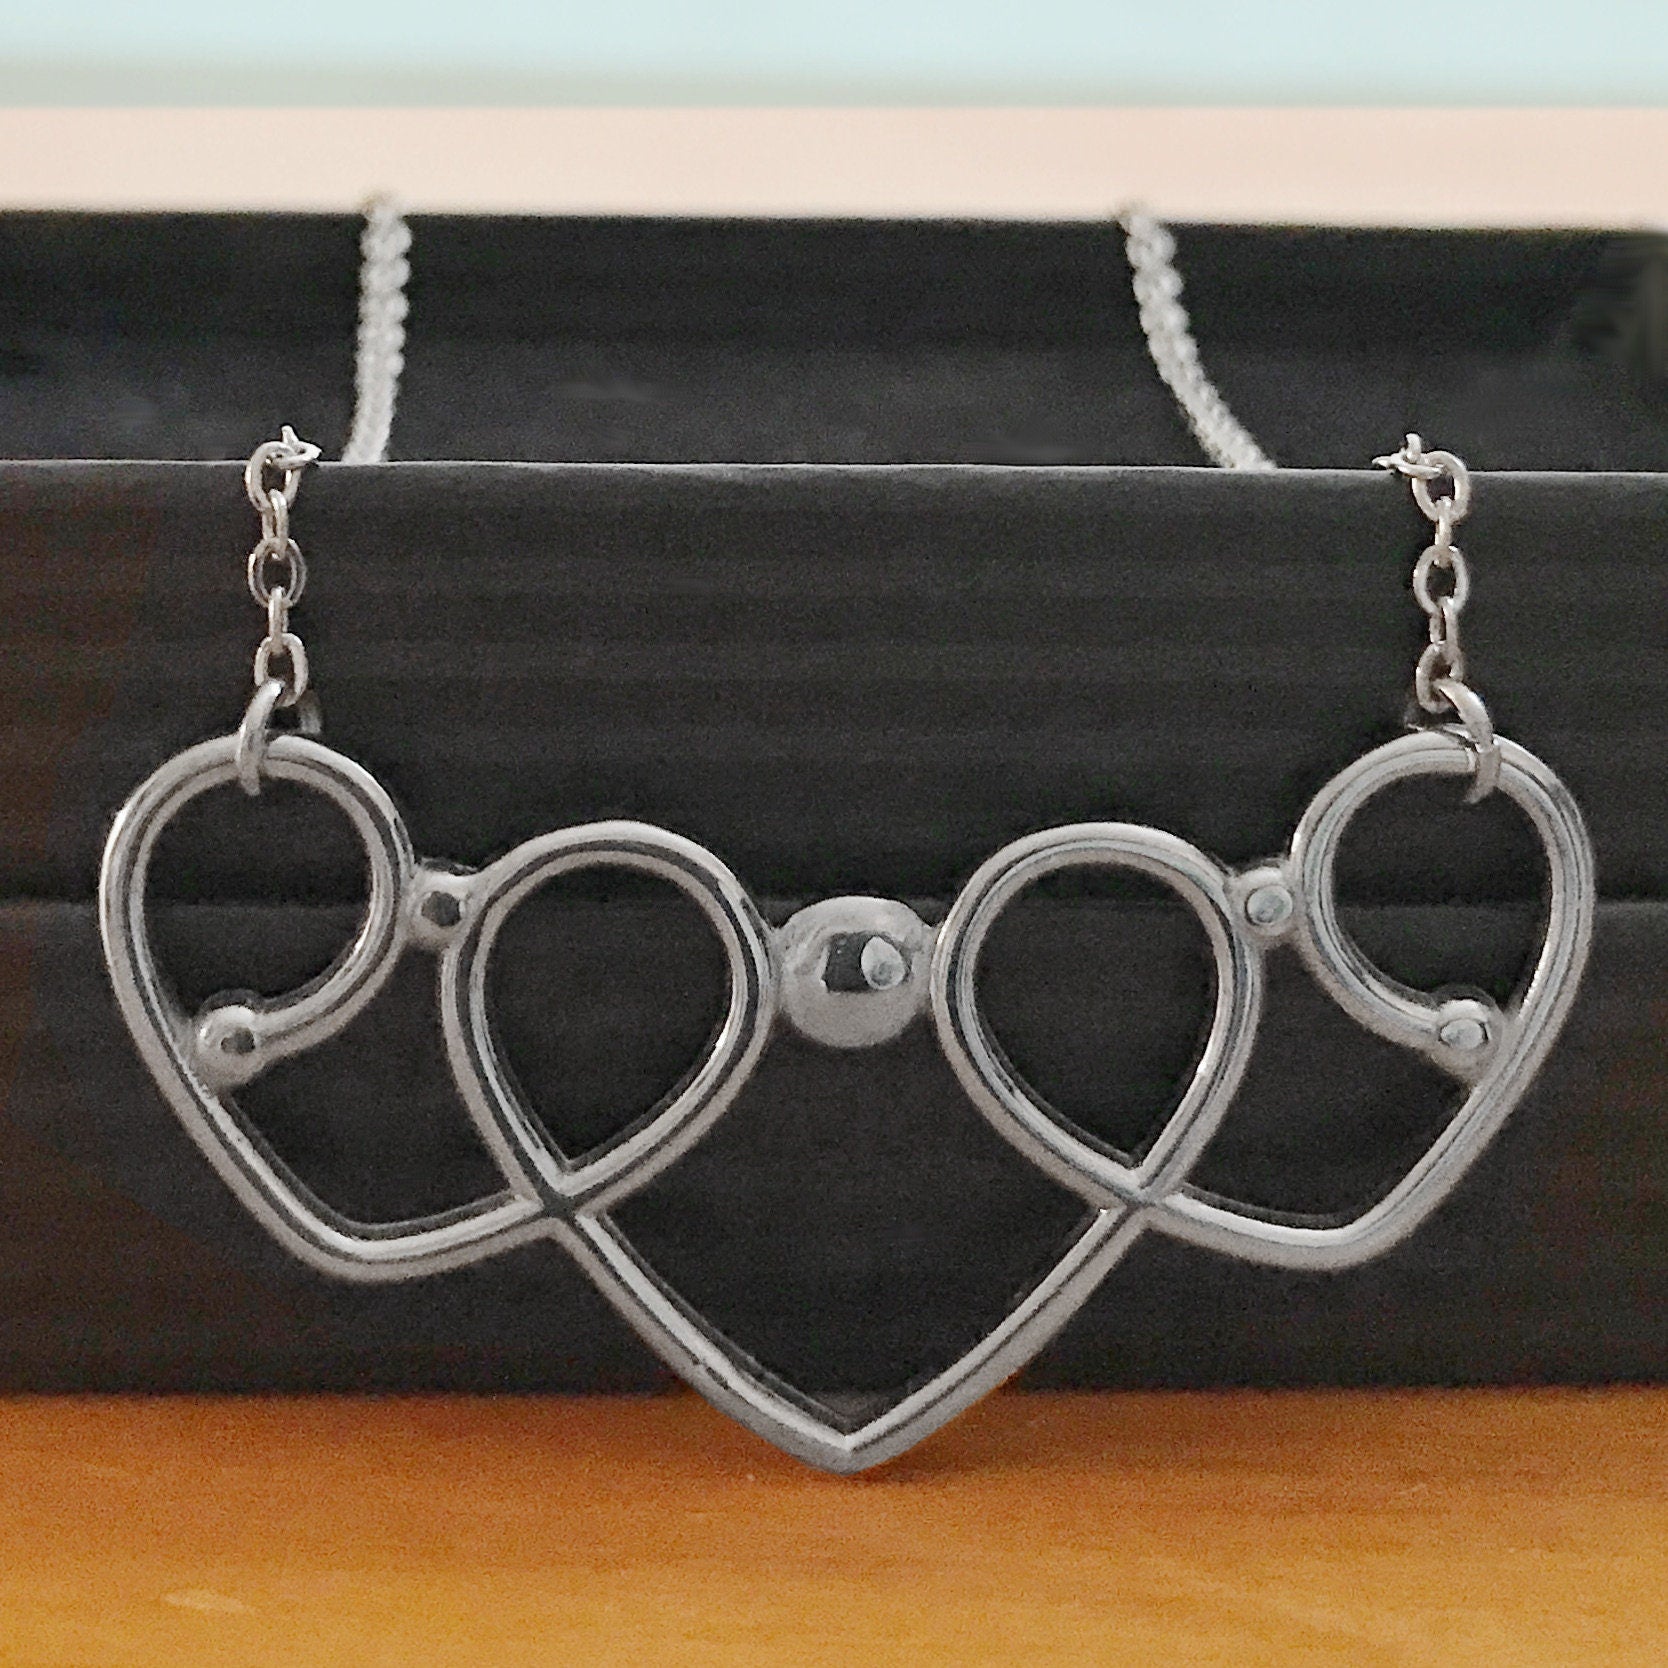 3 Heart Necklace, Triple Wire Heart Pendant, Romantic Gift for Girlfriend, Sweet 16, Present for Wife, Stainless Steel Jewelry